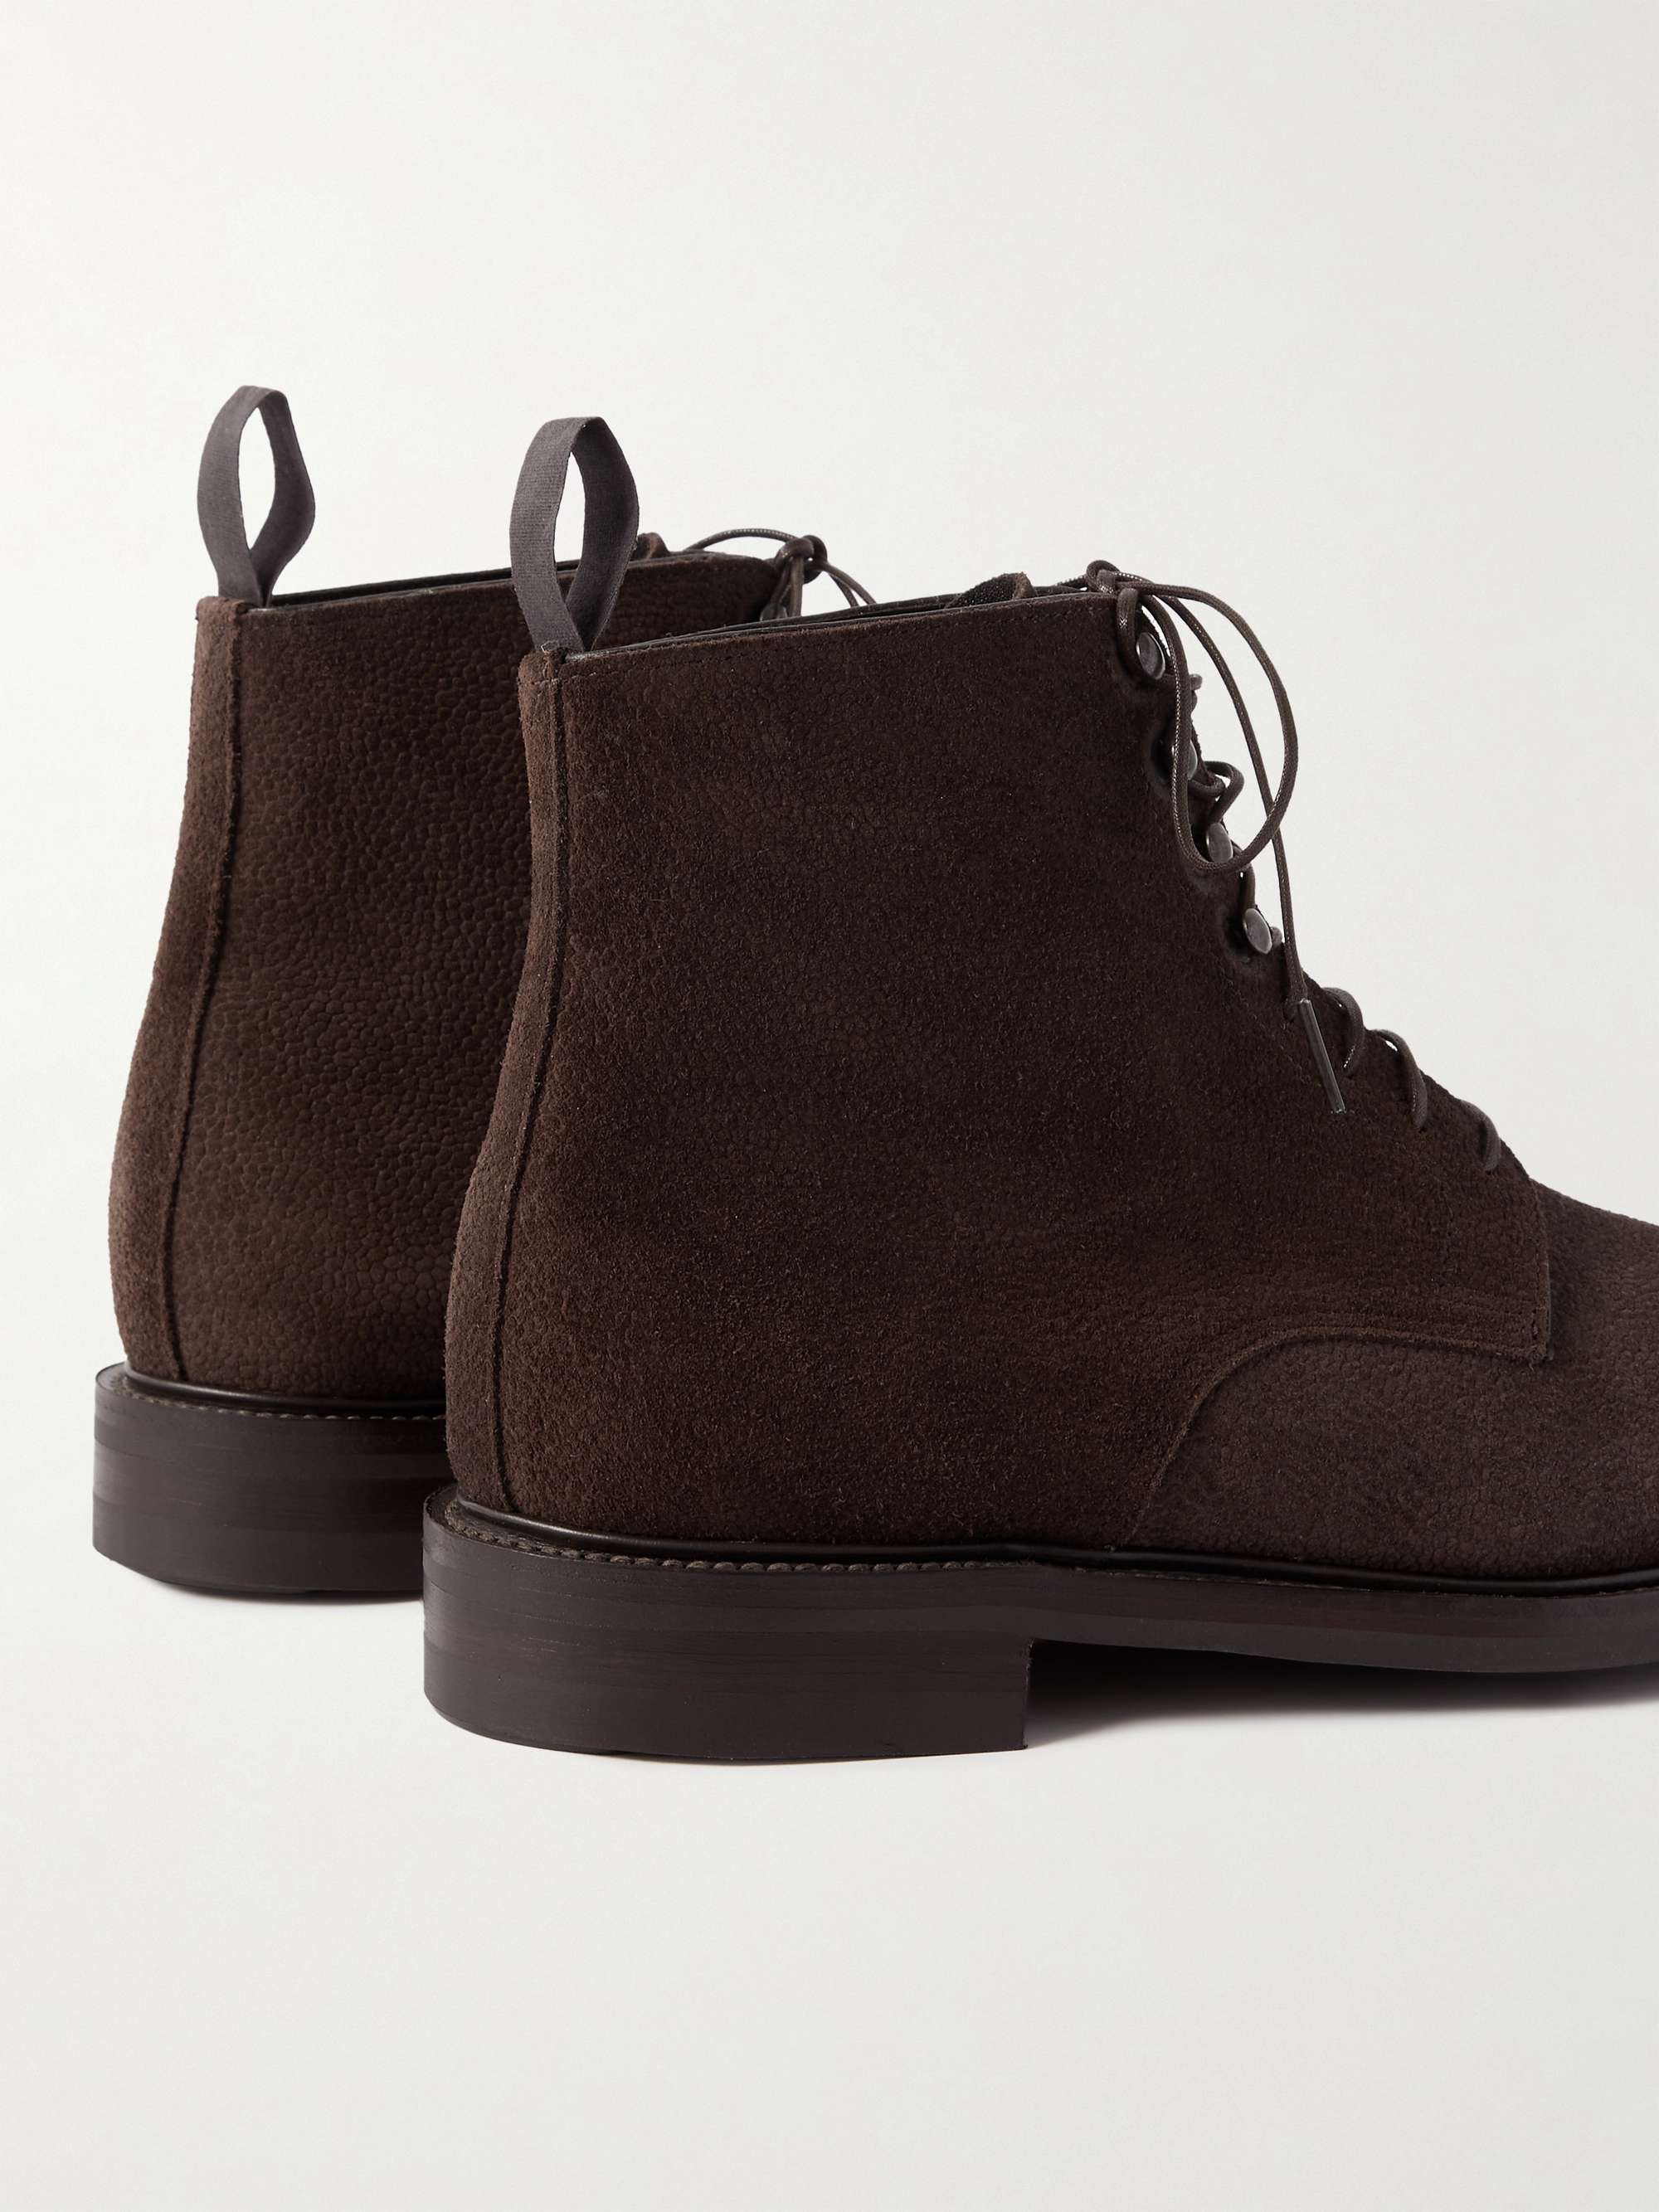 GEORGE CLEVERLEY Taron Pebble-Grain Suede Derby Boots